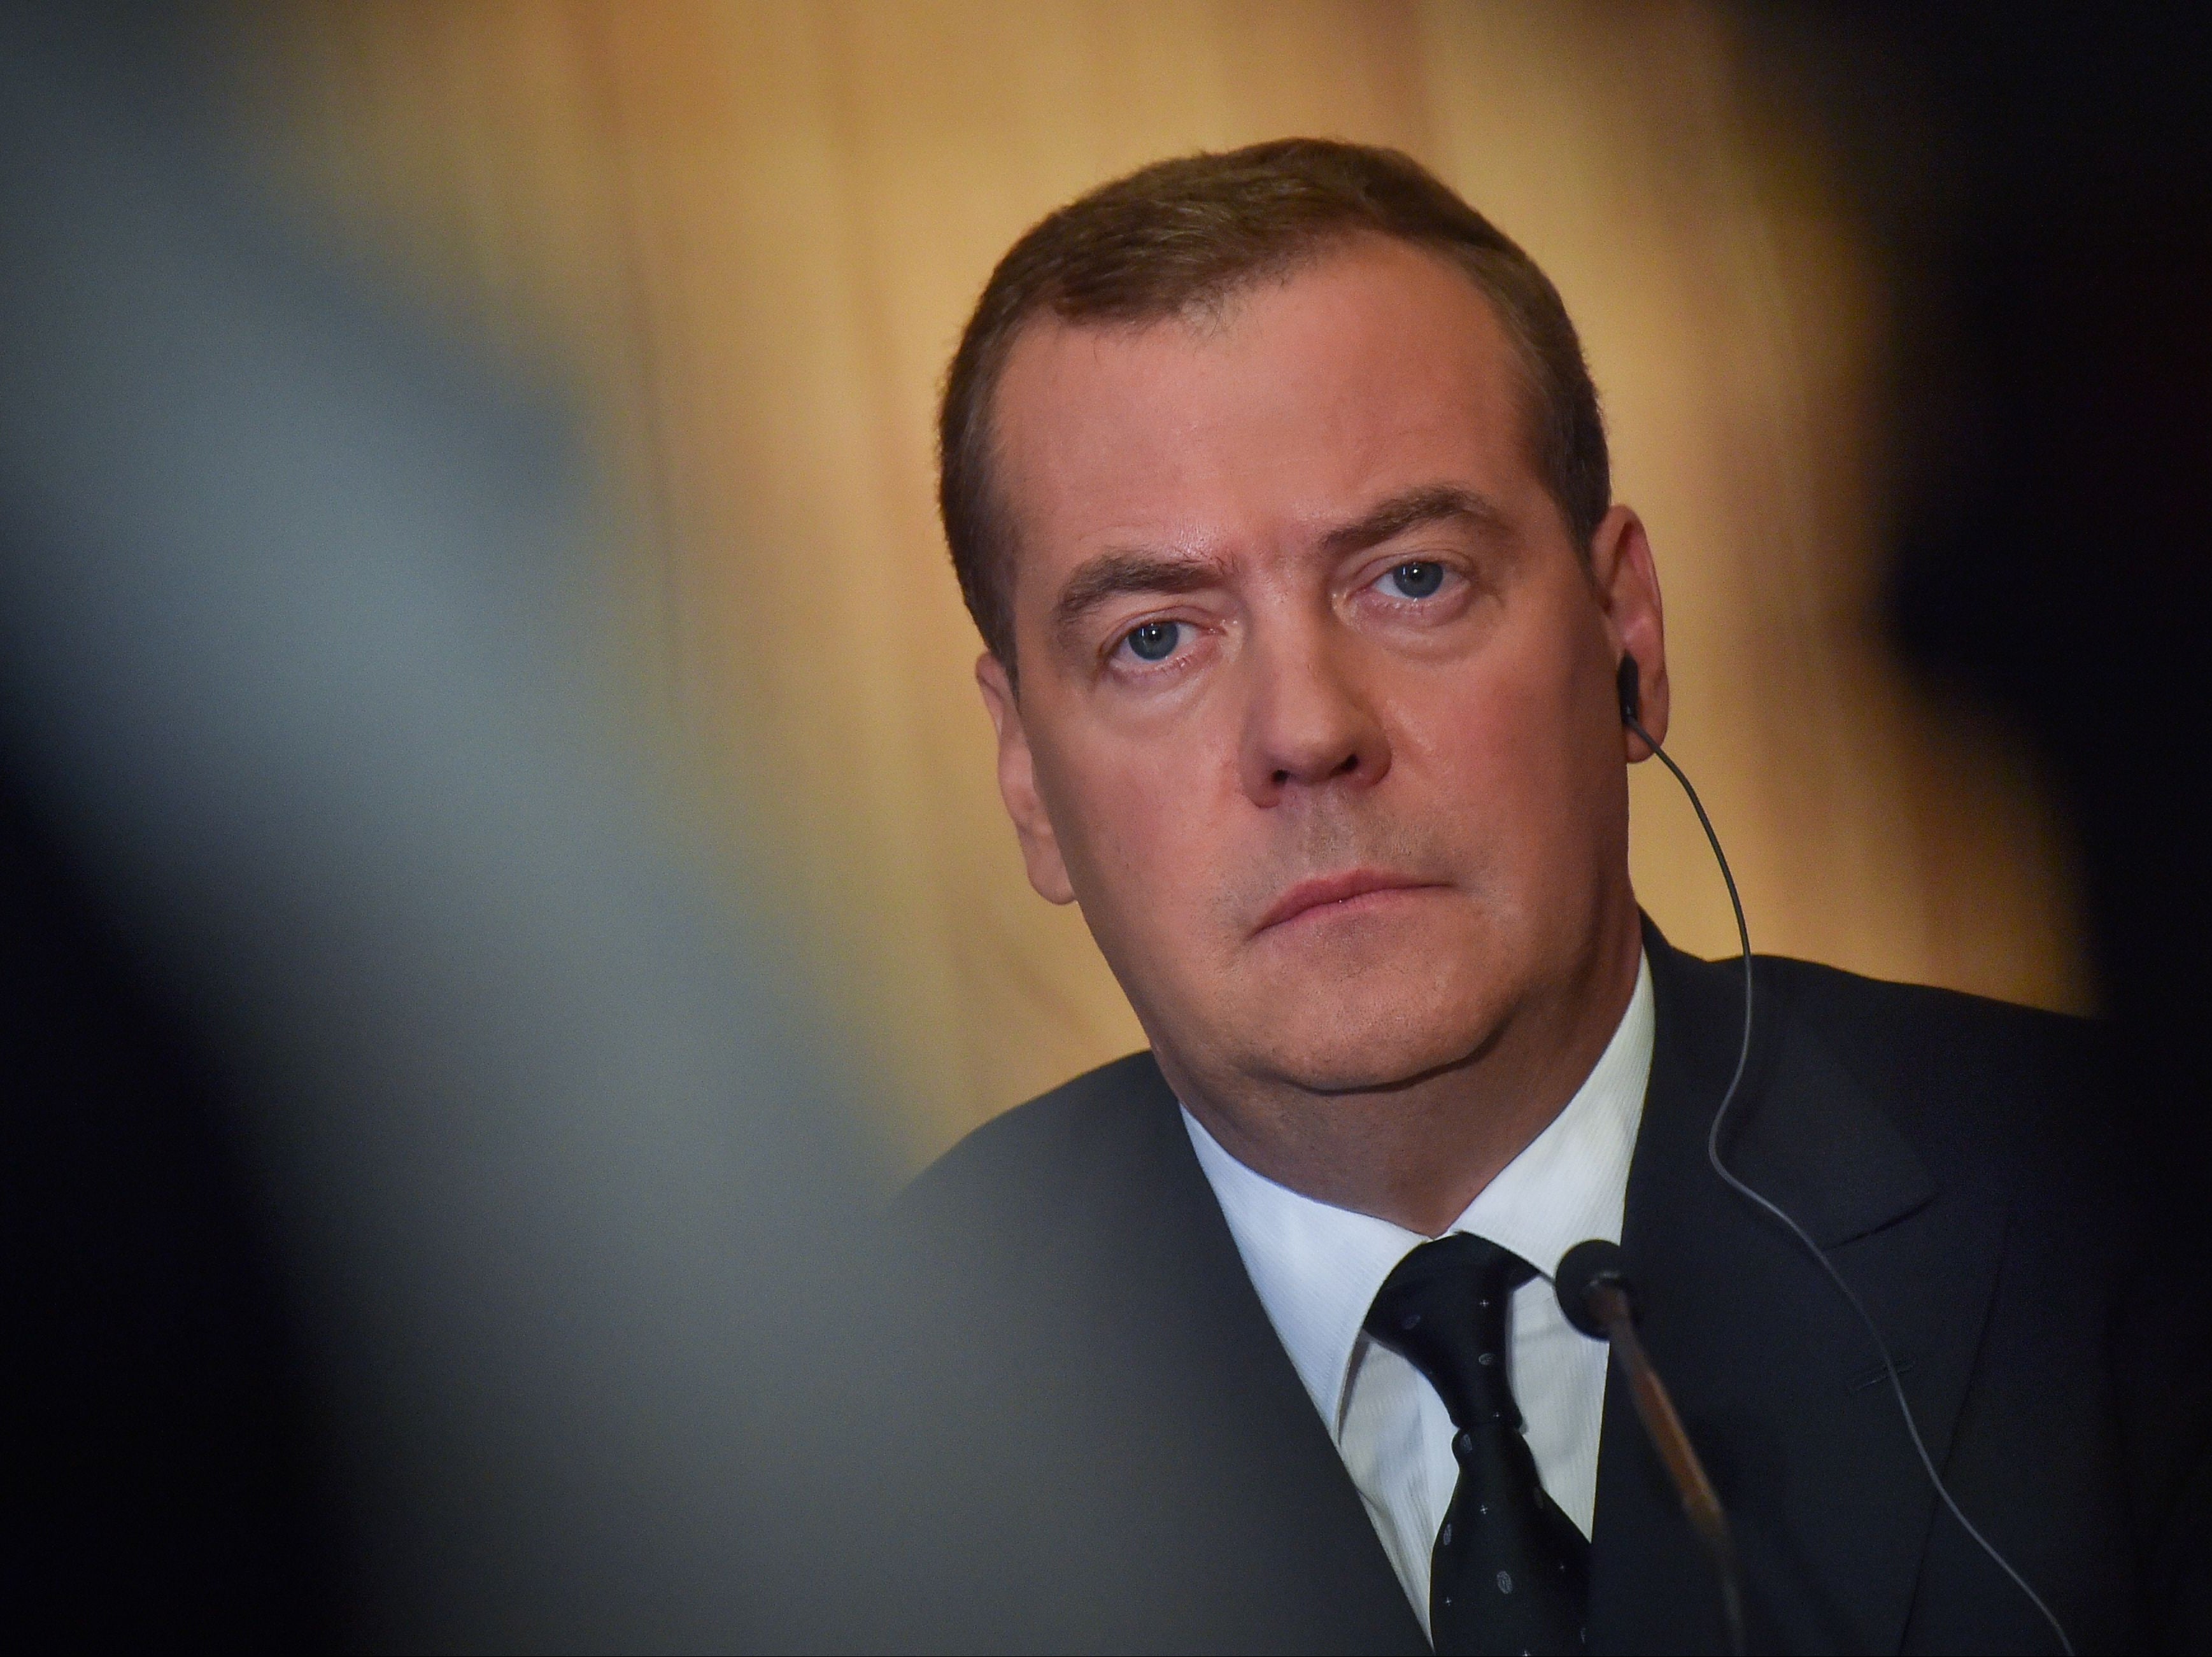 Dmitry Medvedev gives a press conference during an official visit to Le Havre, western France on 24 June, 2019